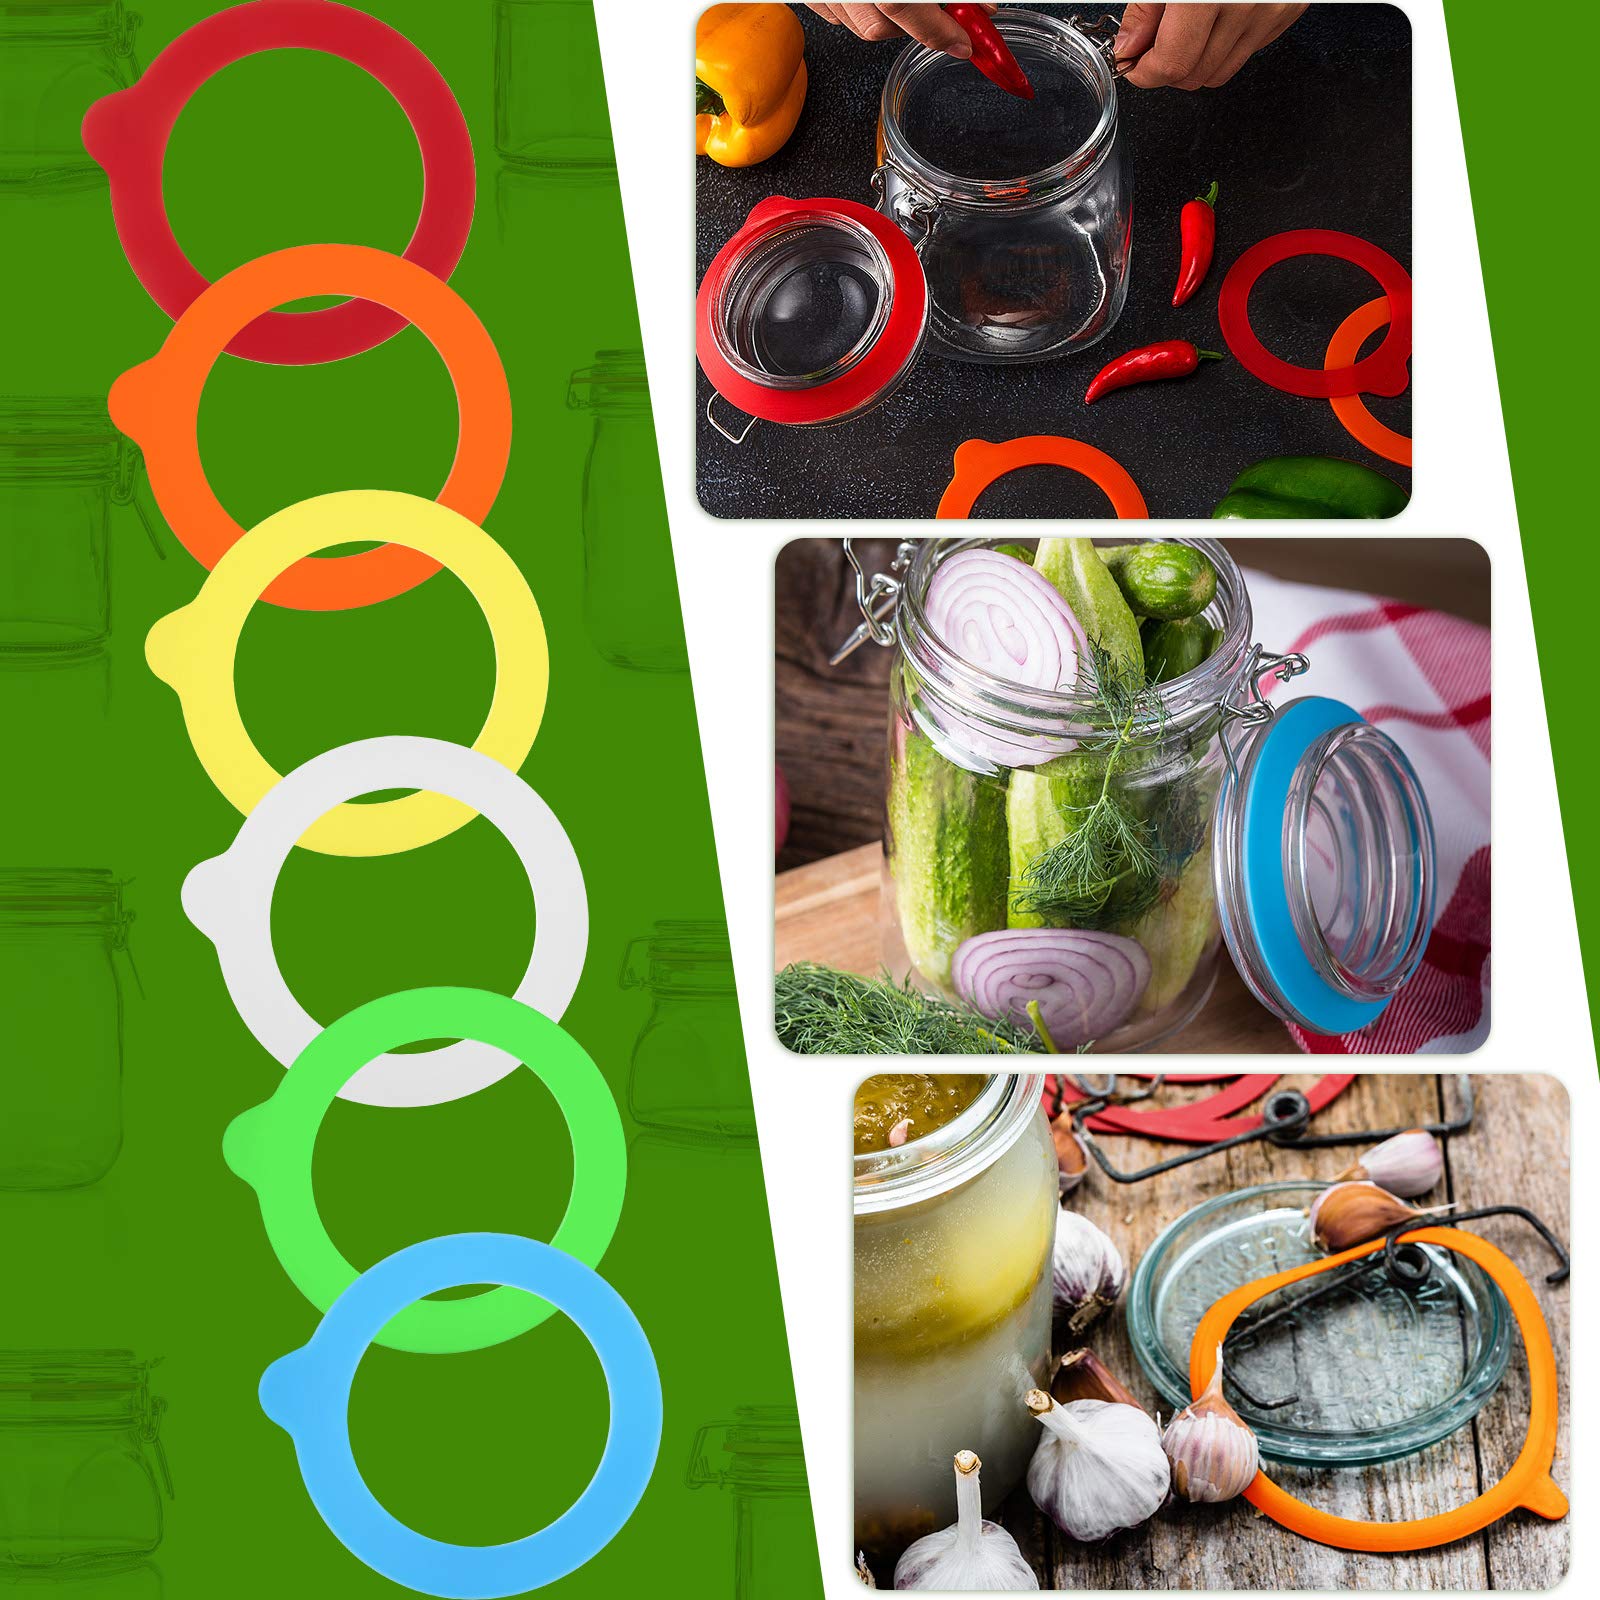 Silicone Jar Gaskets Replacement Reusable Silicone Seals Leak-proof Silicone Gasket Sealing Rings for Regular Mouth Canning Jars, 6 Colors (30 Pieces)